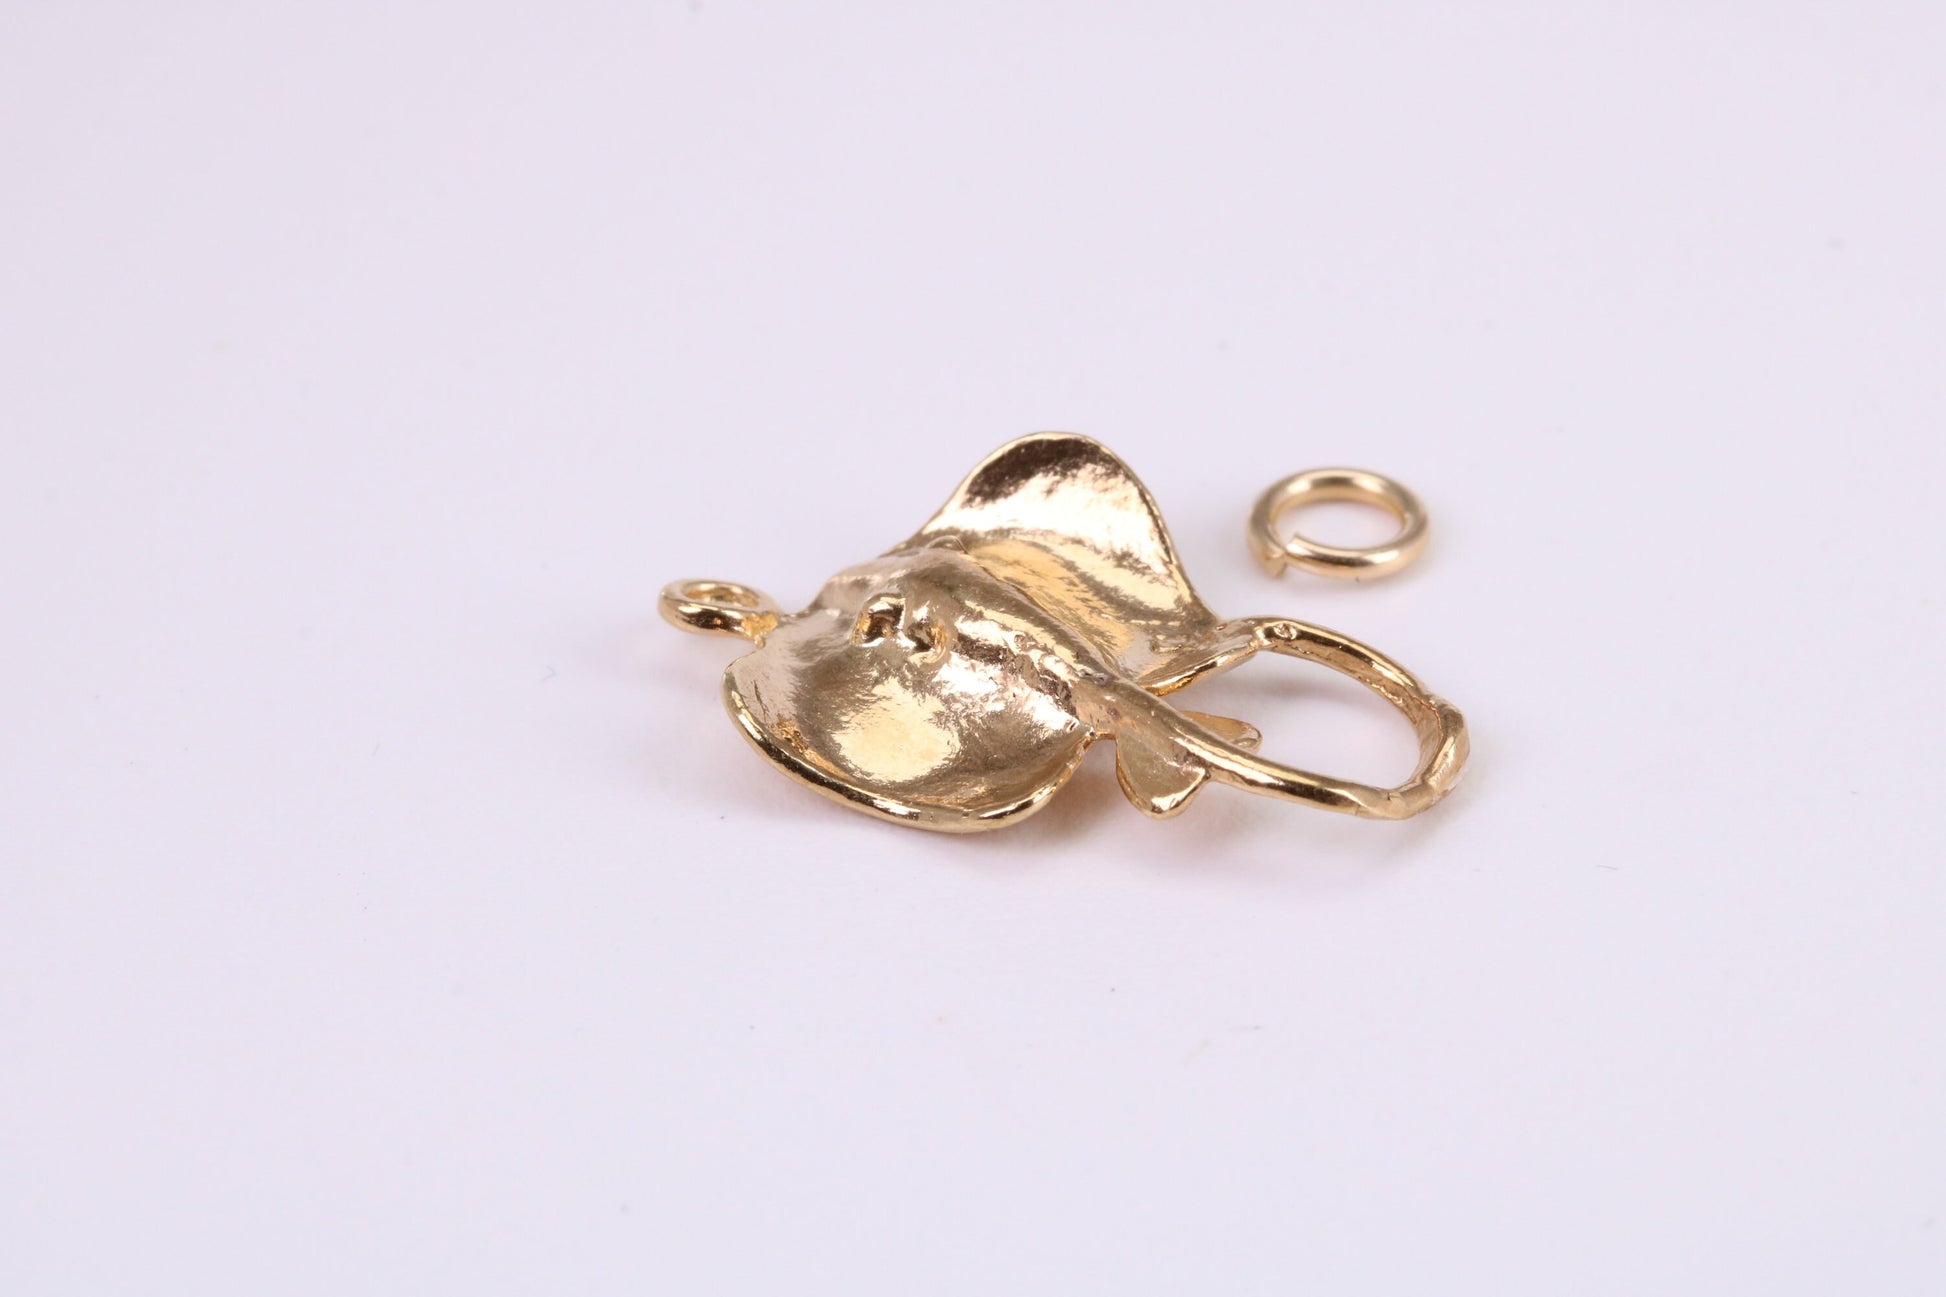 Sting Ray Charm, Traditional Charm, Made from Solid Yellow Gold, British Hallmarked, Complete with Attachment Link